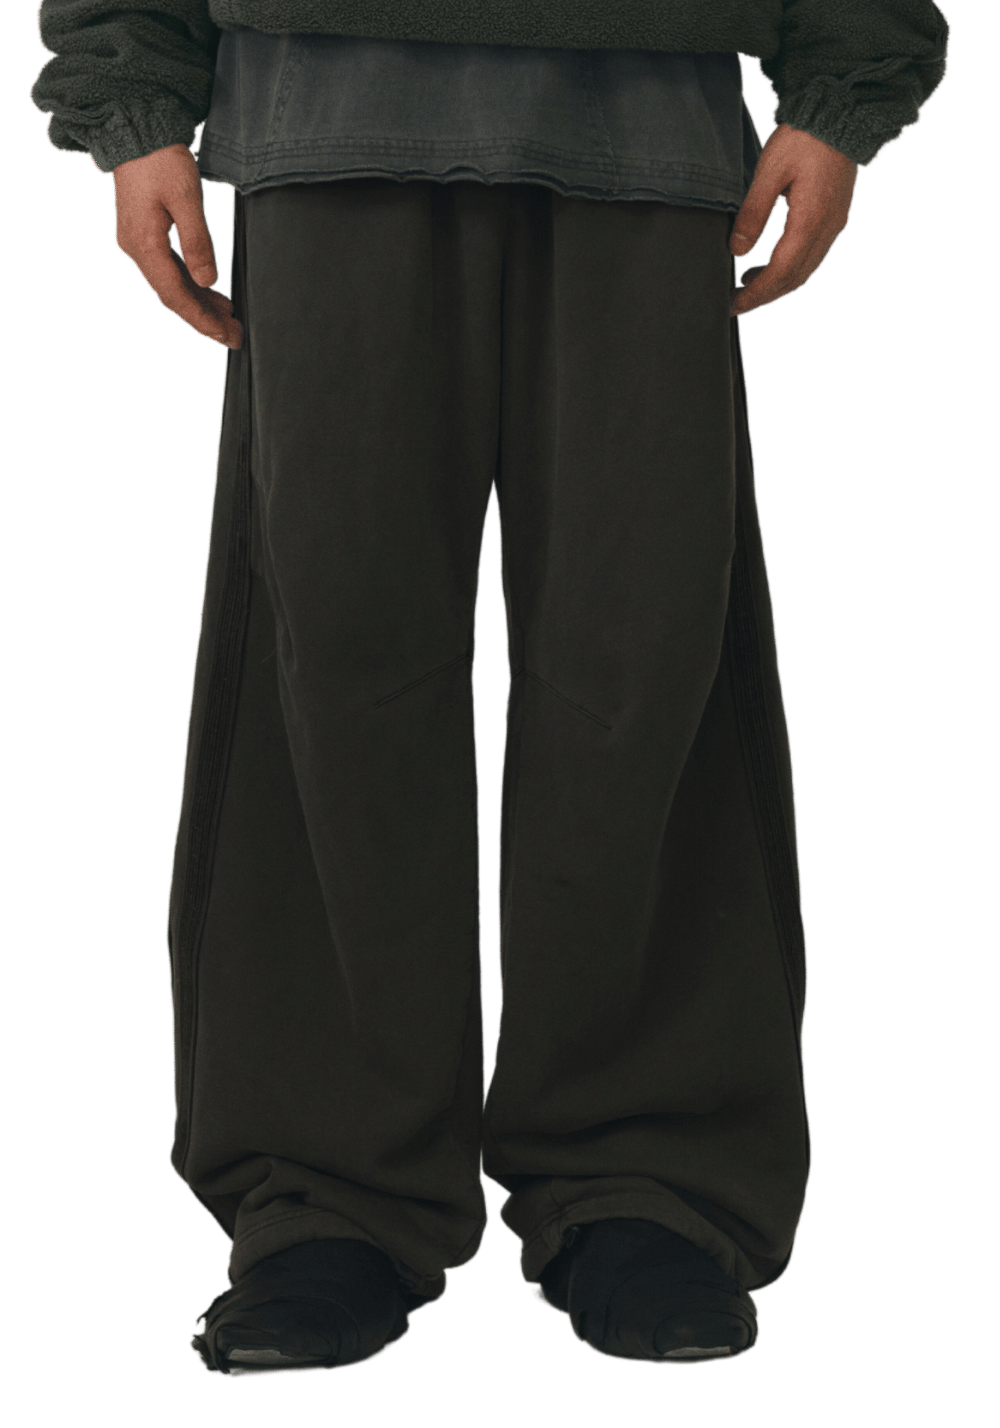 Striped Embroidered  Sweatpants - PSYLOS 1, Striped Embroidered  Sweatpants, Pants, D5ove, PSYLOS 1